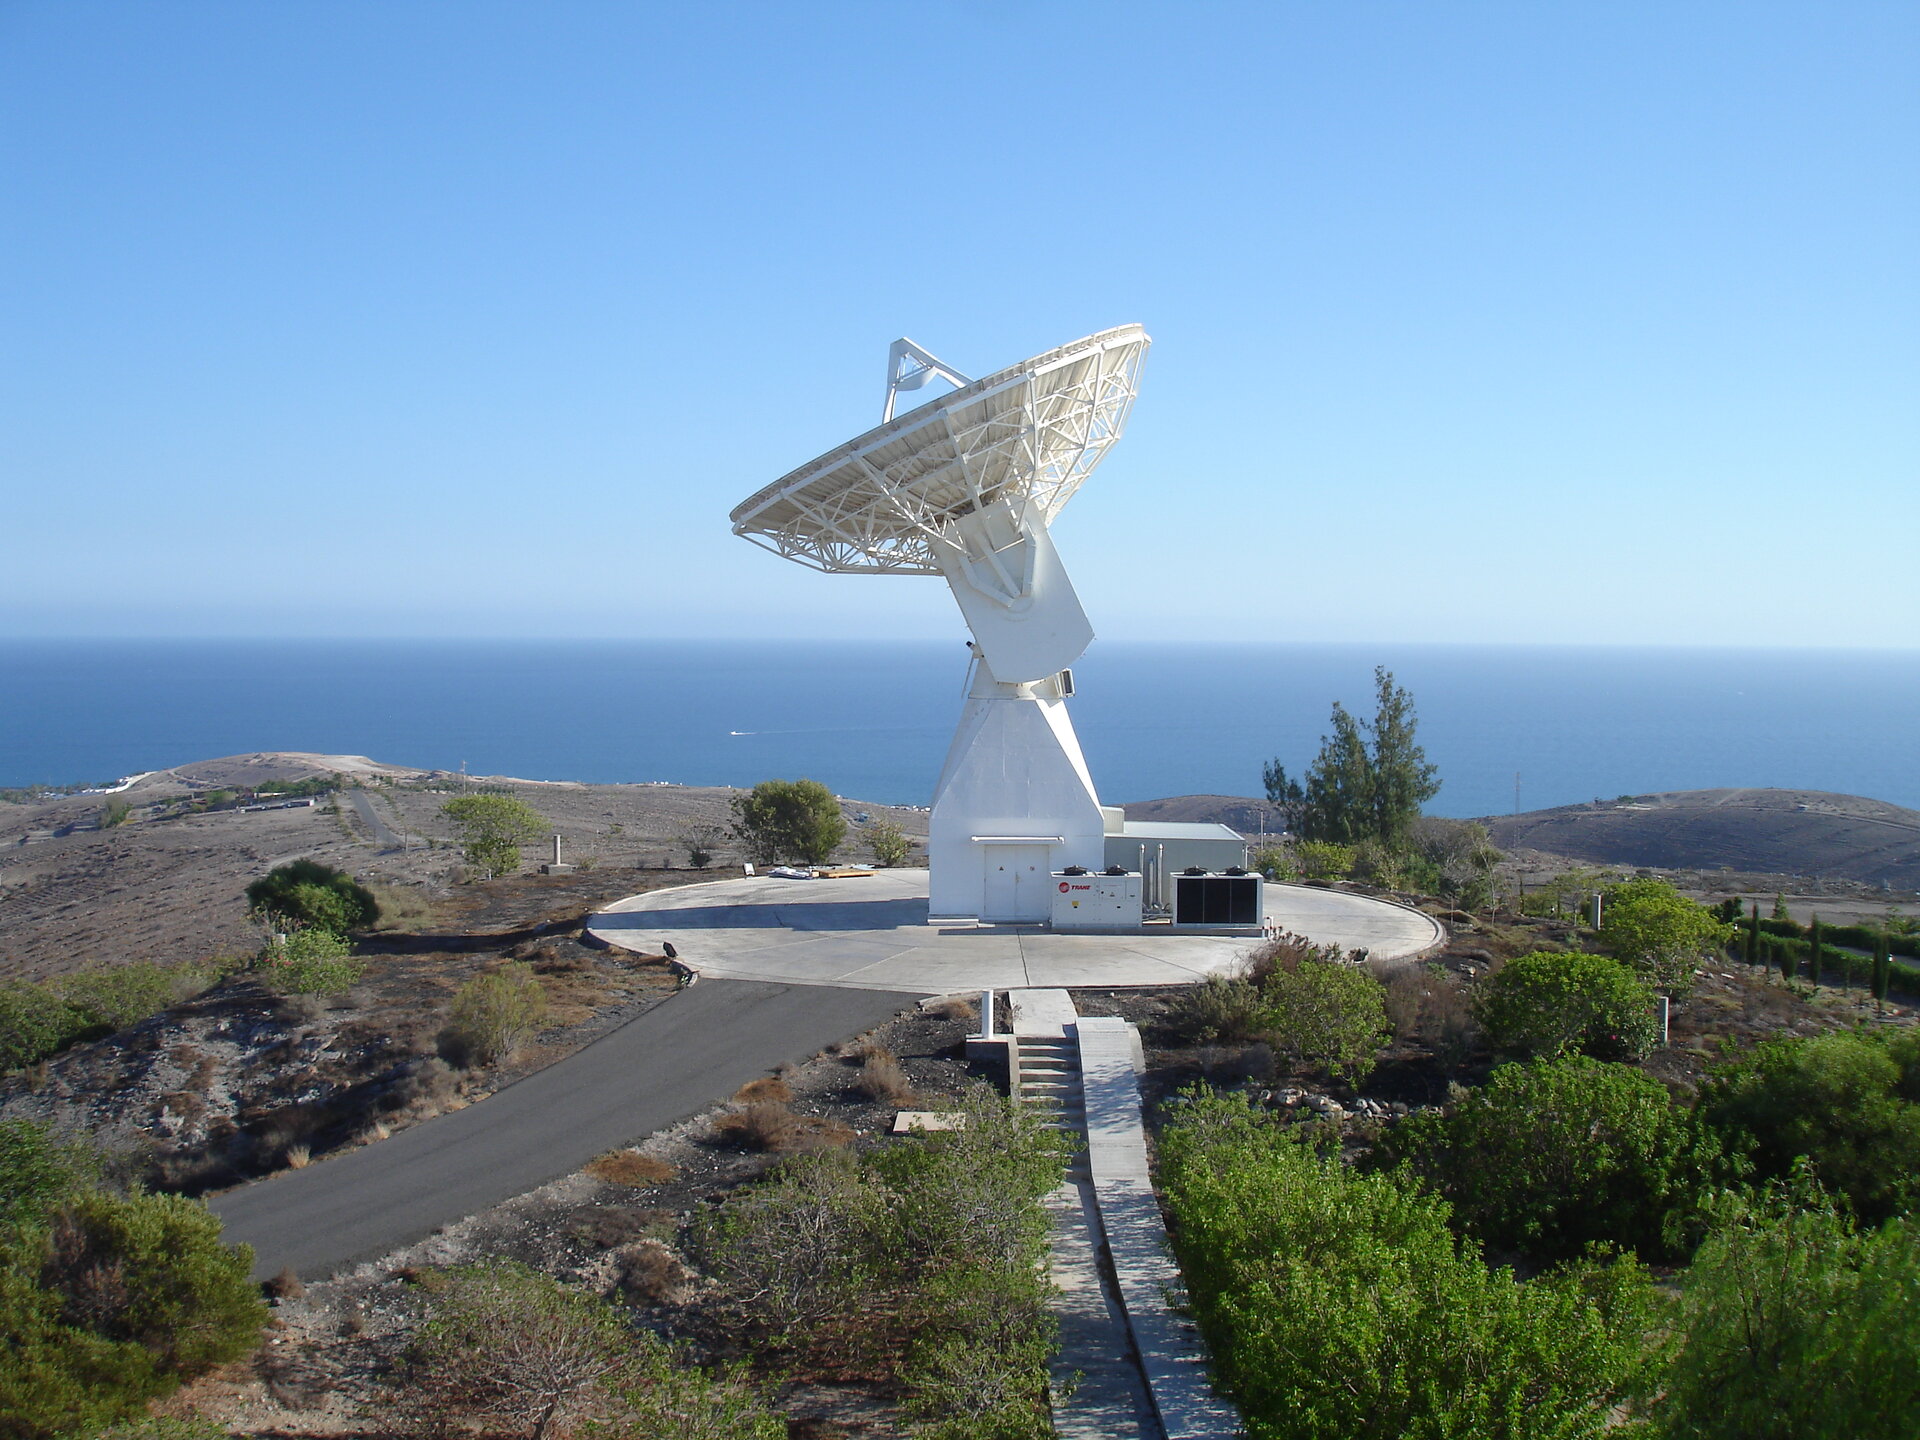 ESA's Maspalomas station today, part of the global ESTRACK network